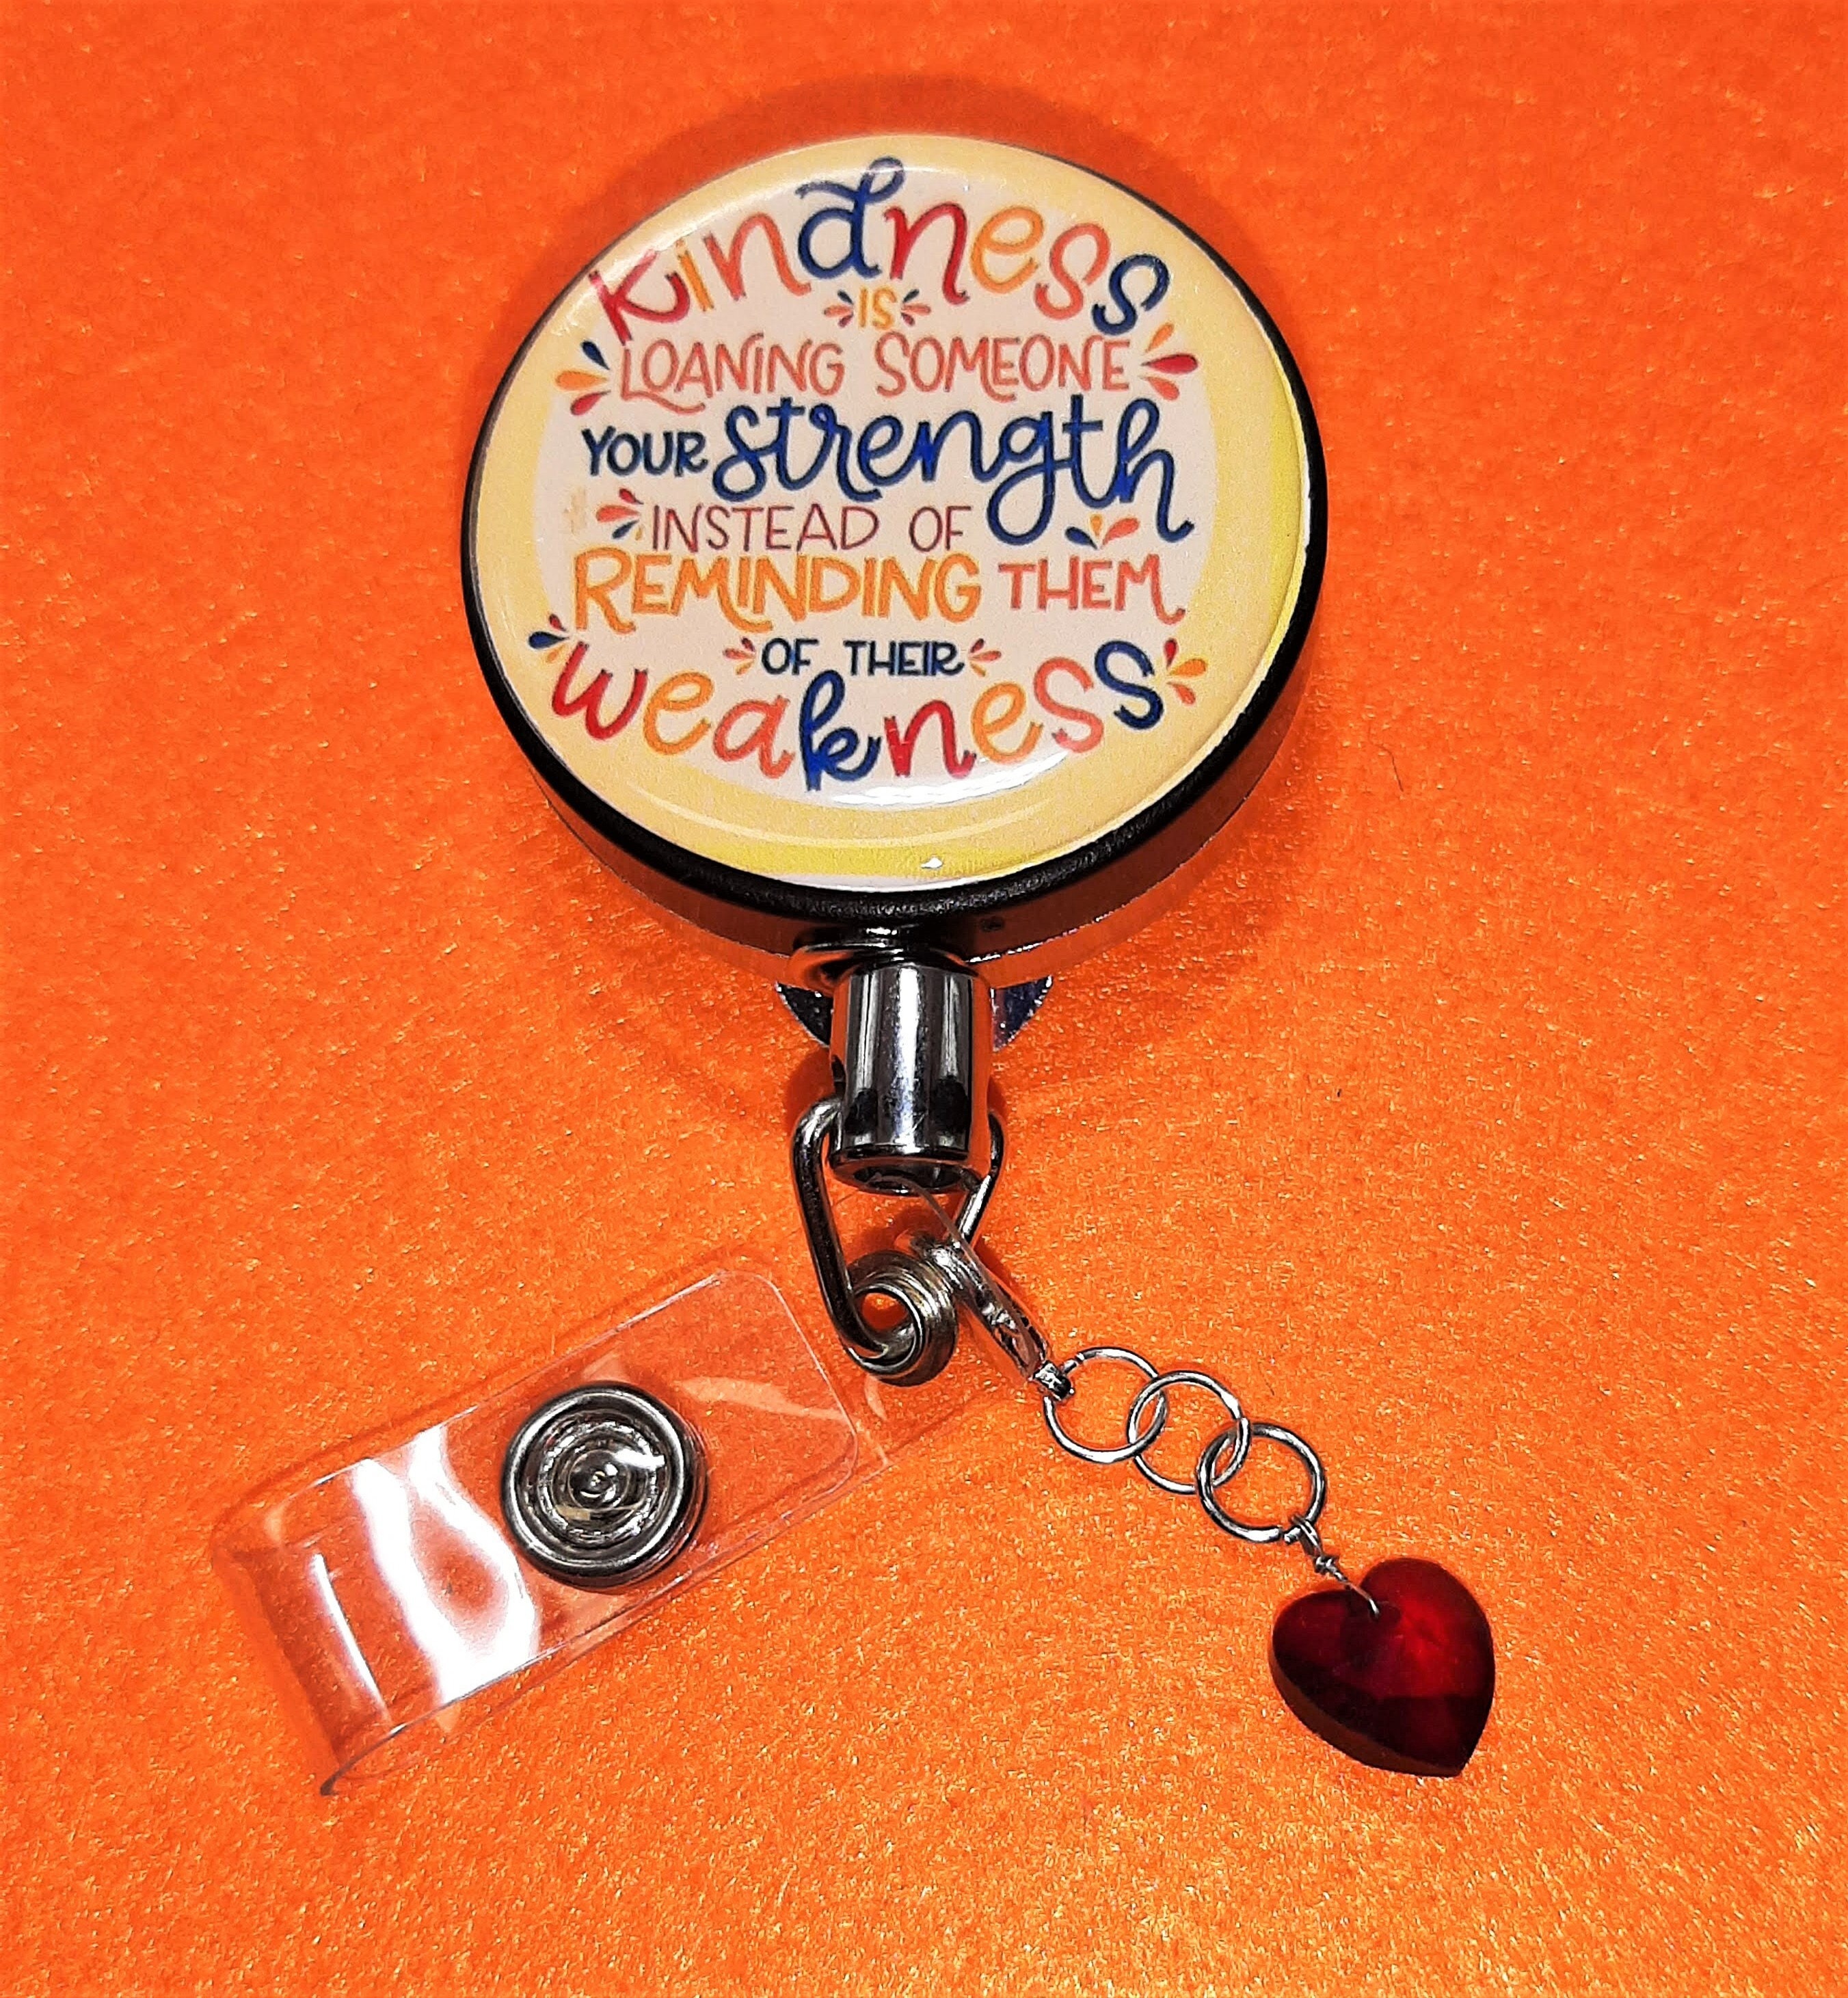 Kindness is Loaning Someone Your Strength Badge Reels or